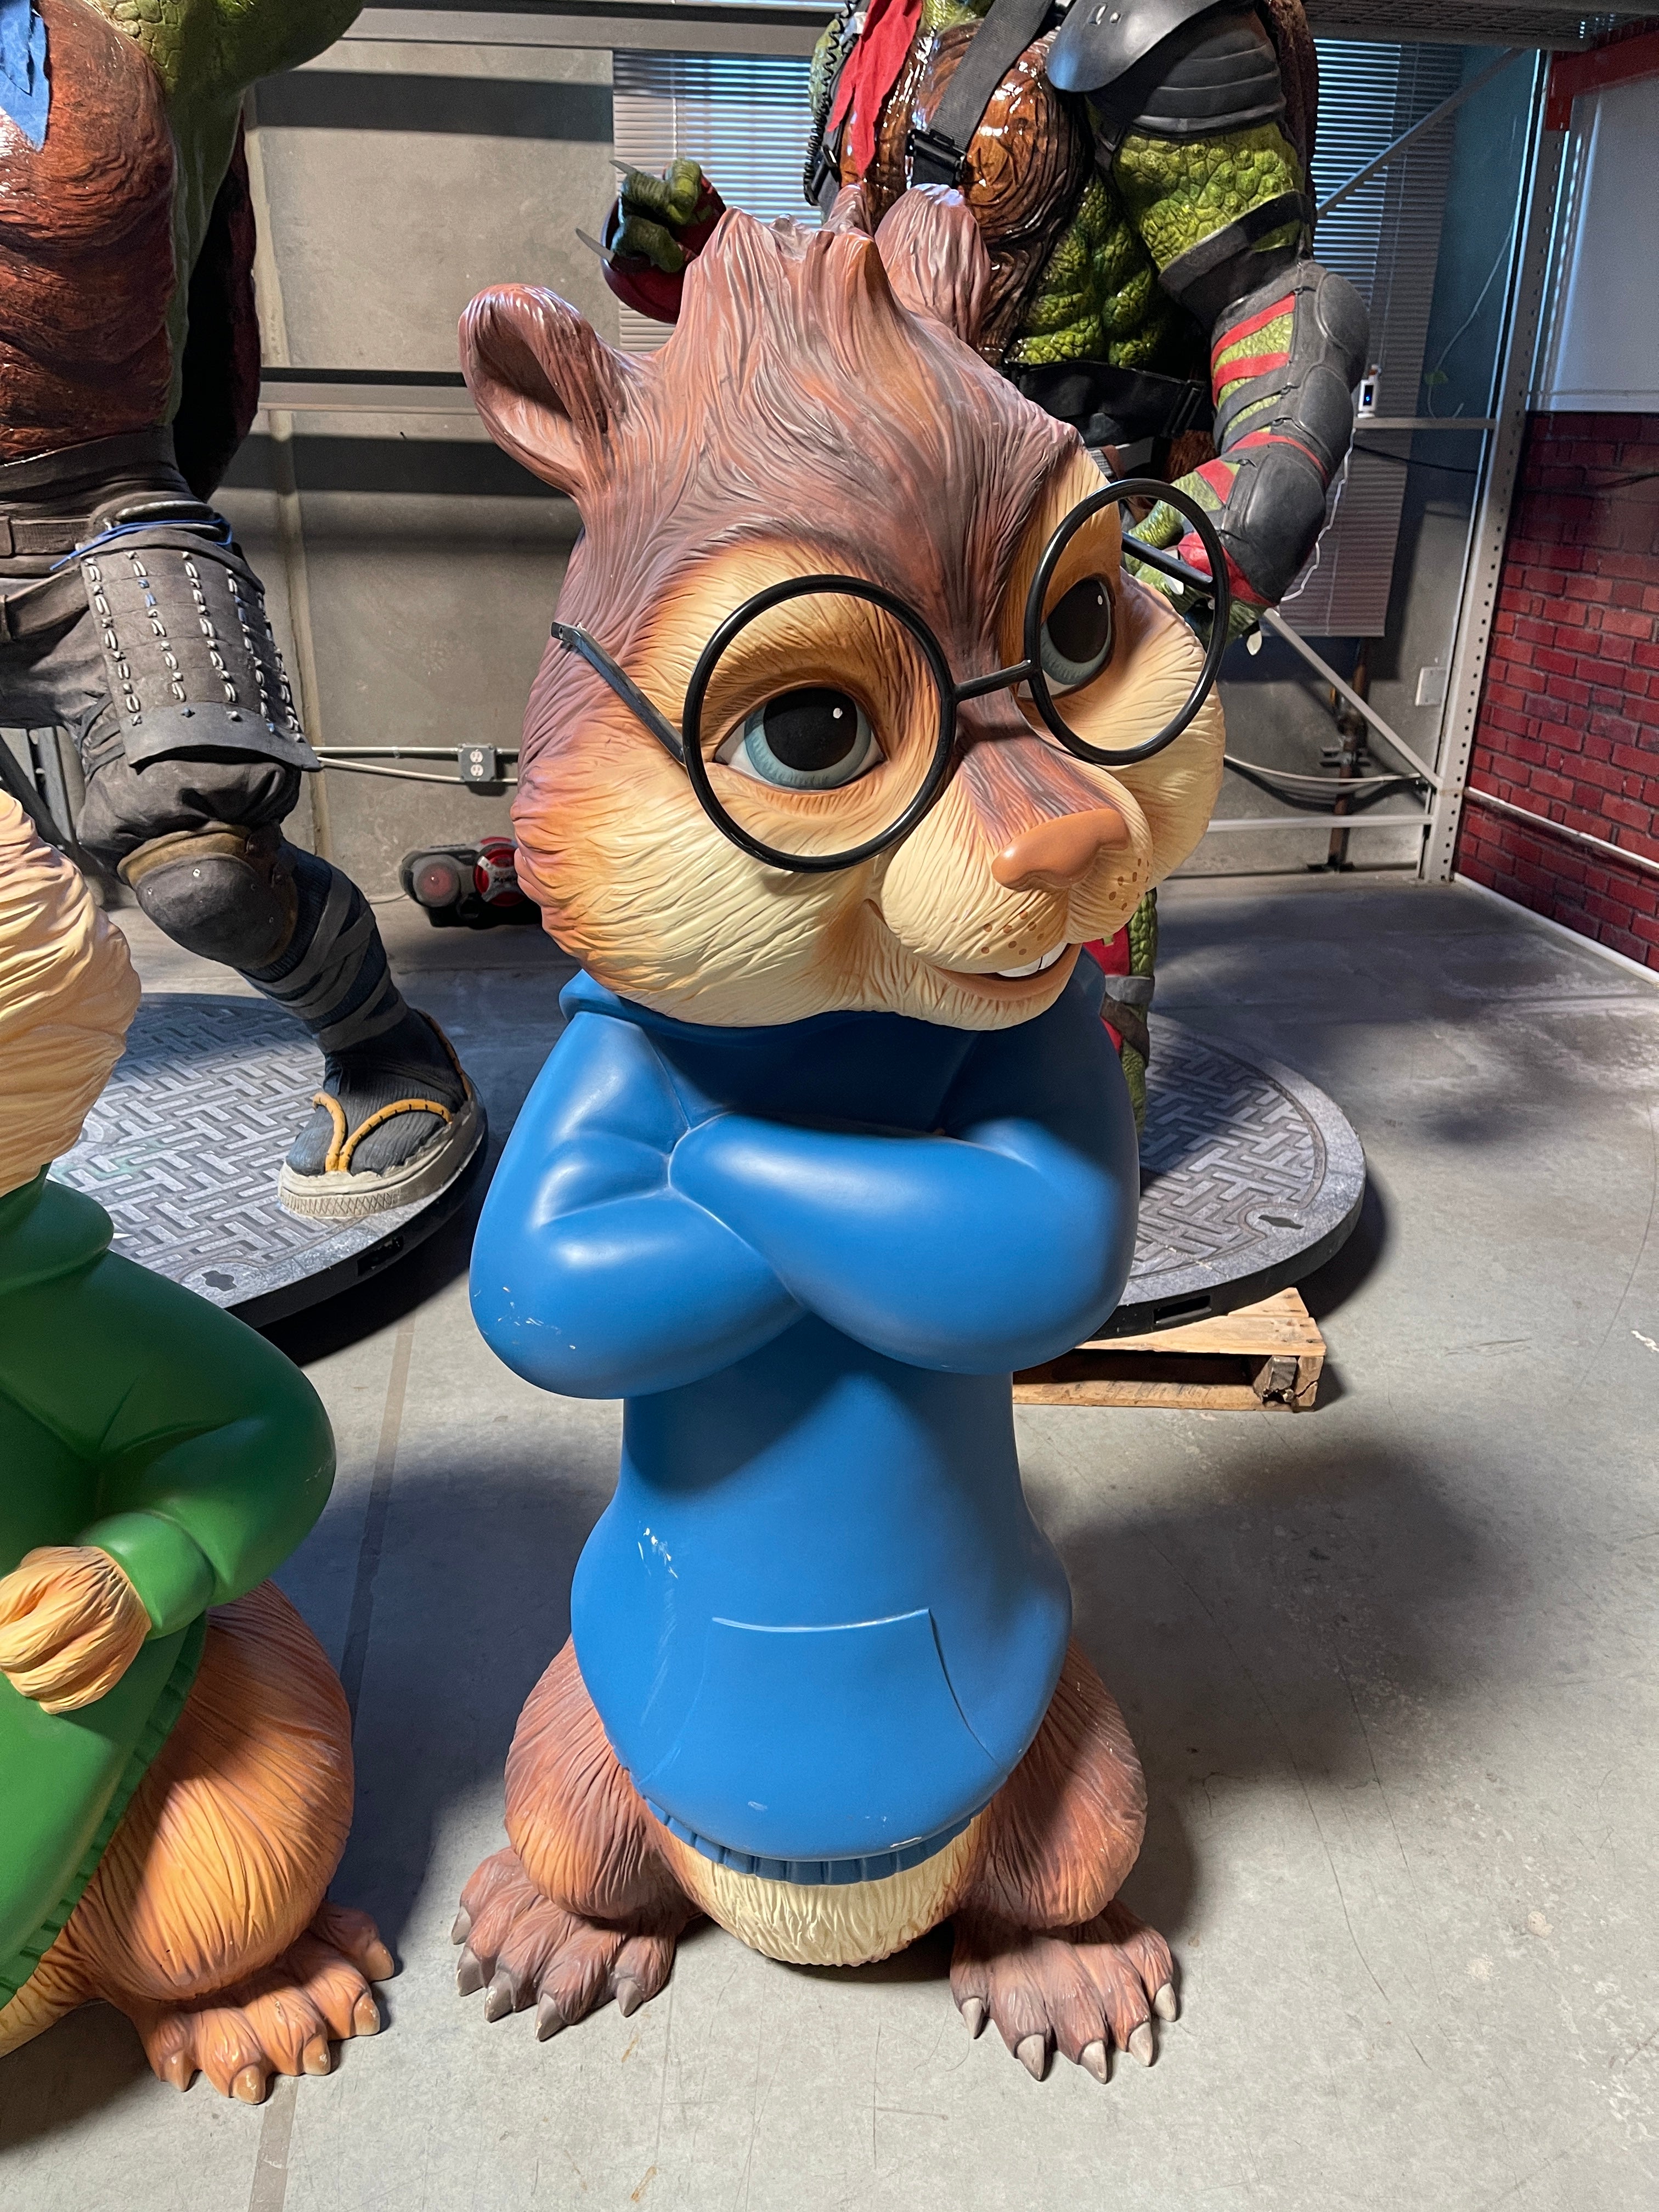 Alvin and the chipmunks statue